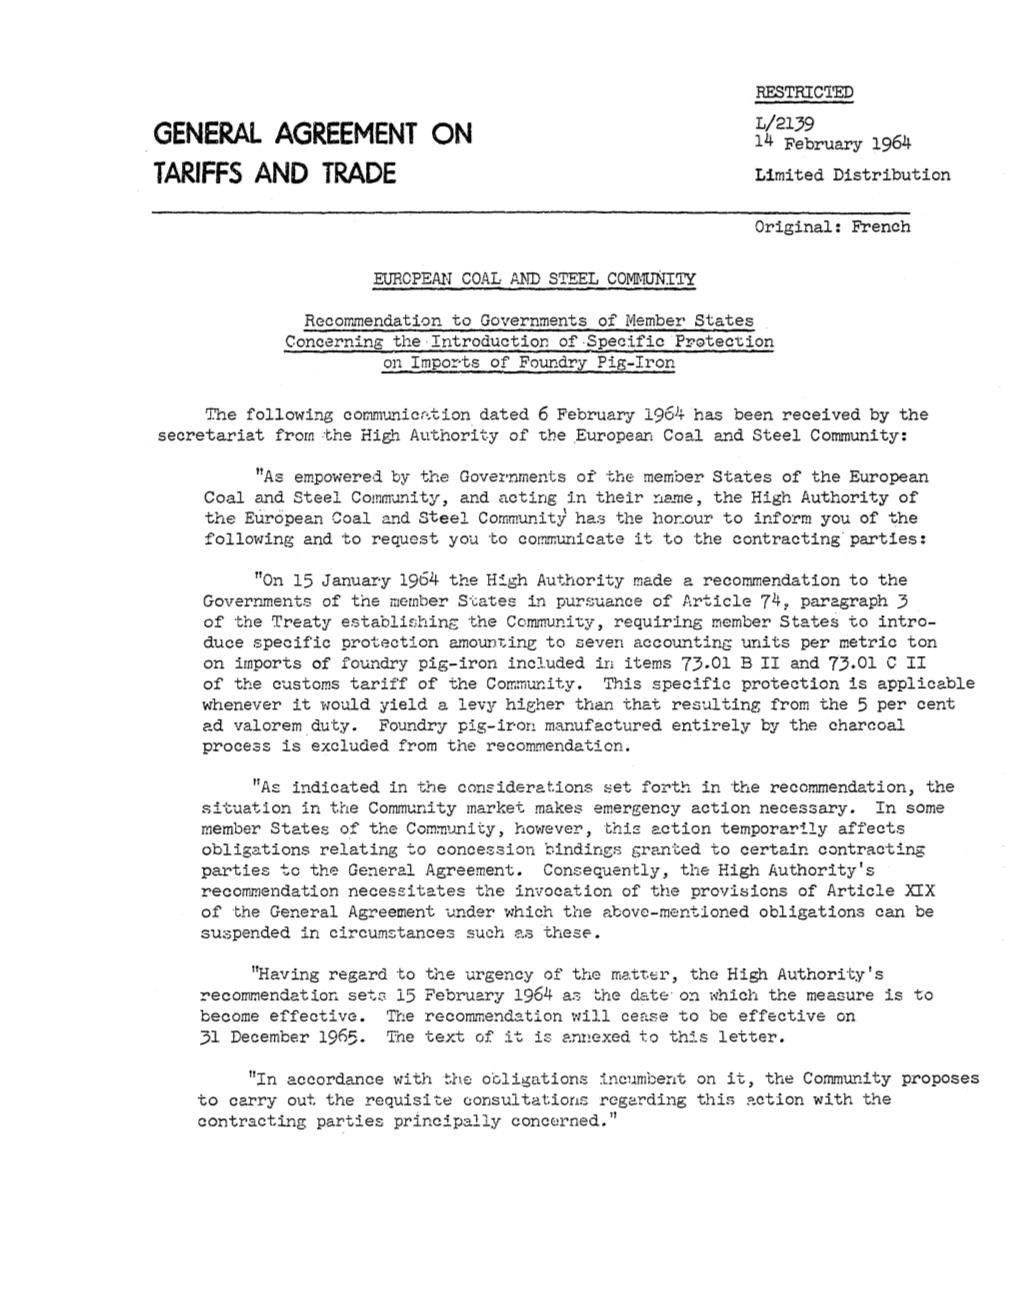 14 February 1964 TARIFFS and TRADE Limited Distribution